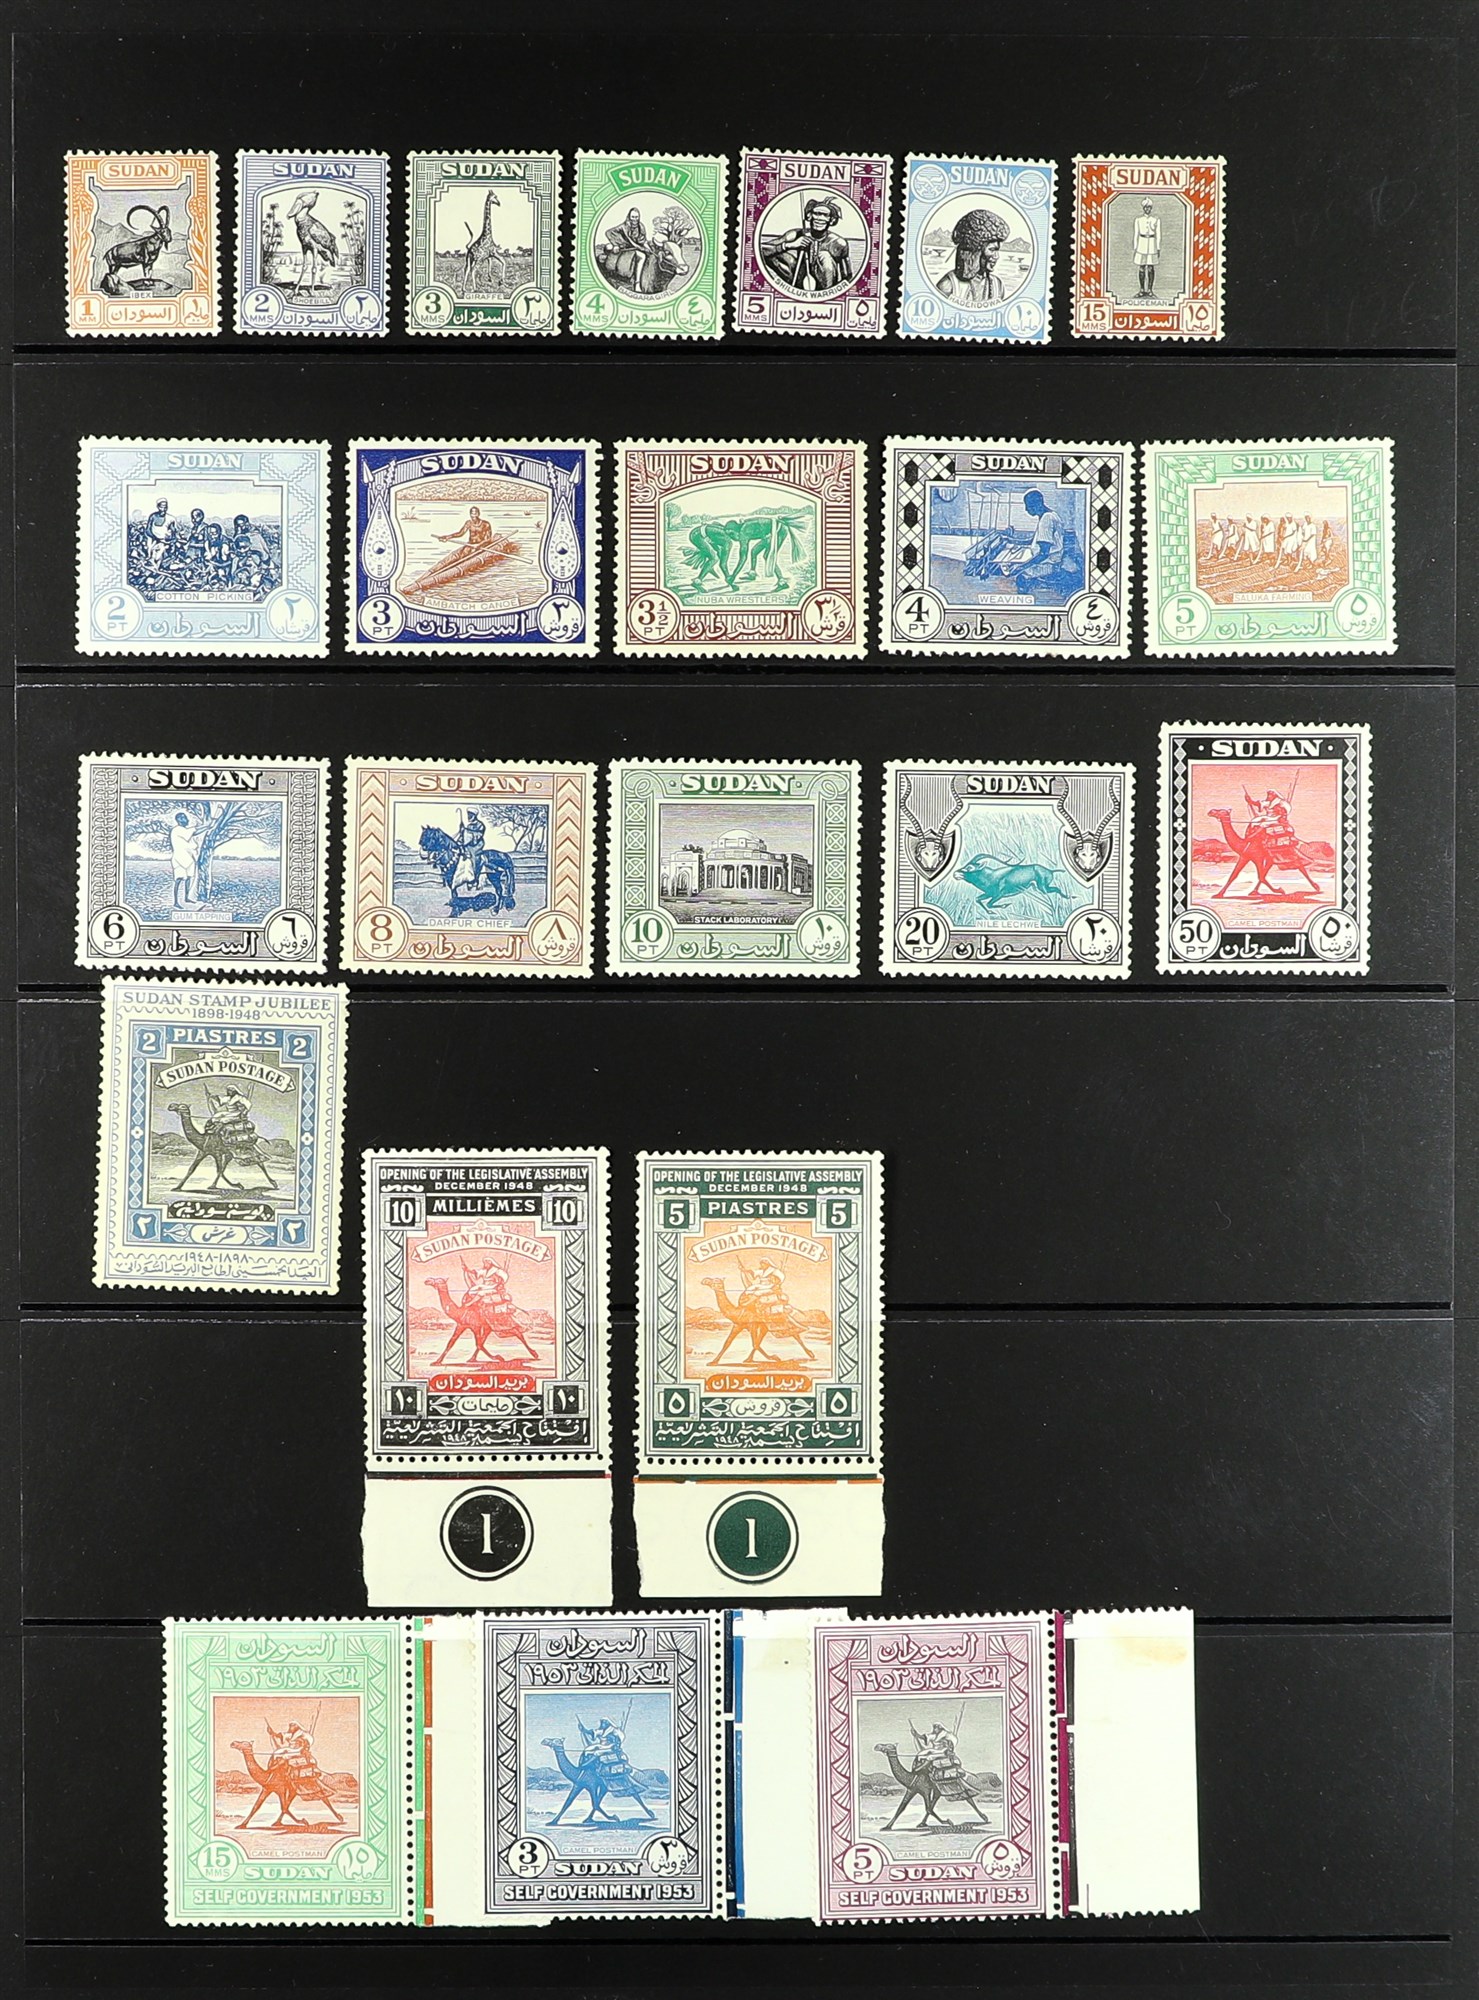 SUDAN 1898 - 1961 COLLECTION of 127 mint stamps on protective pages, note 1898, 1902-21, 1921-23 and - Image 4 of 5